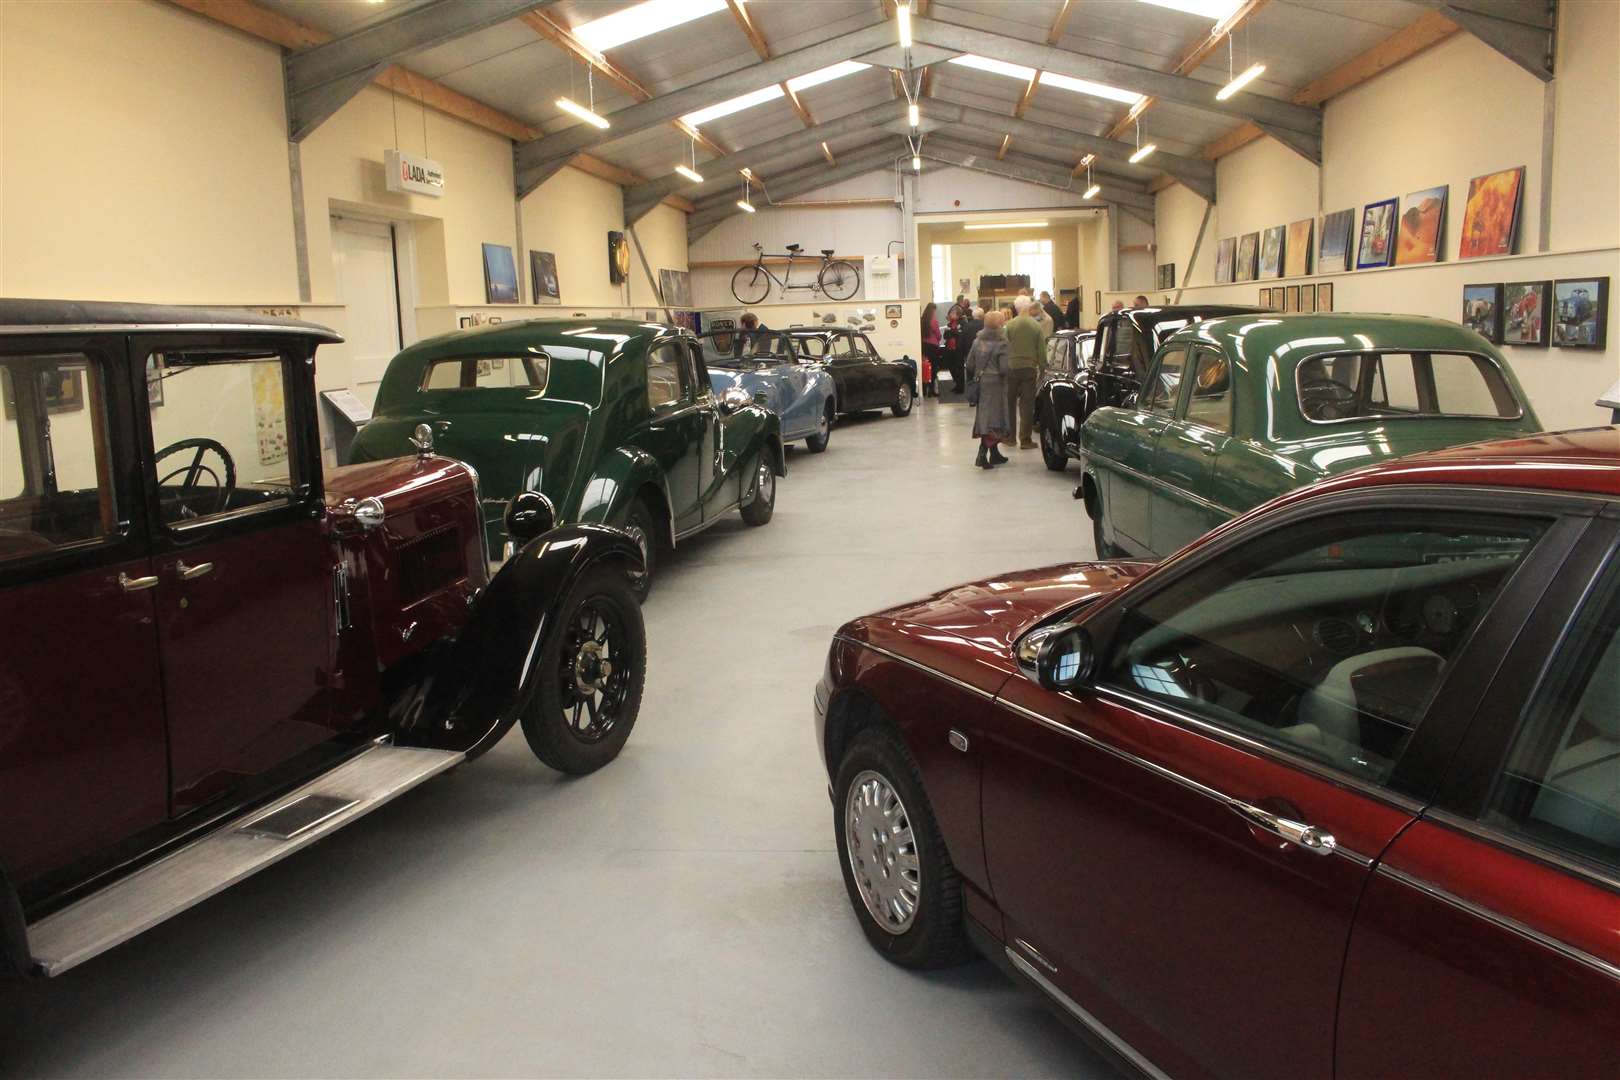 Halkirk Heritage and Vintage Motor Society will be taking part for the first time, having been officially opened in April.